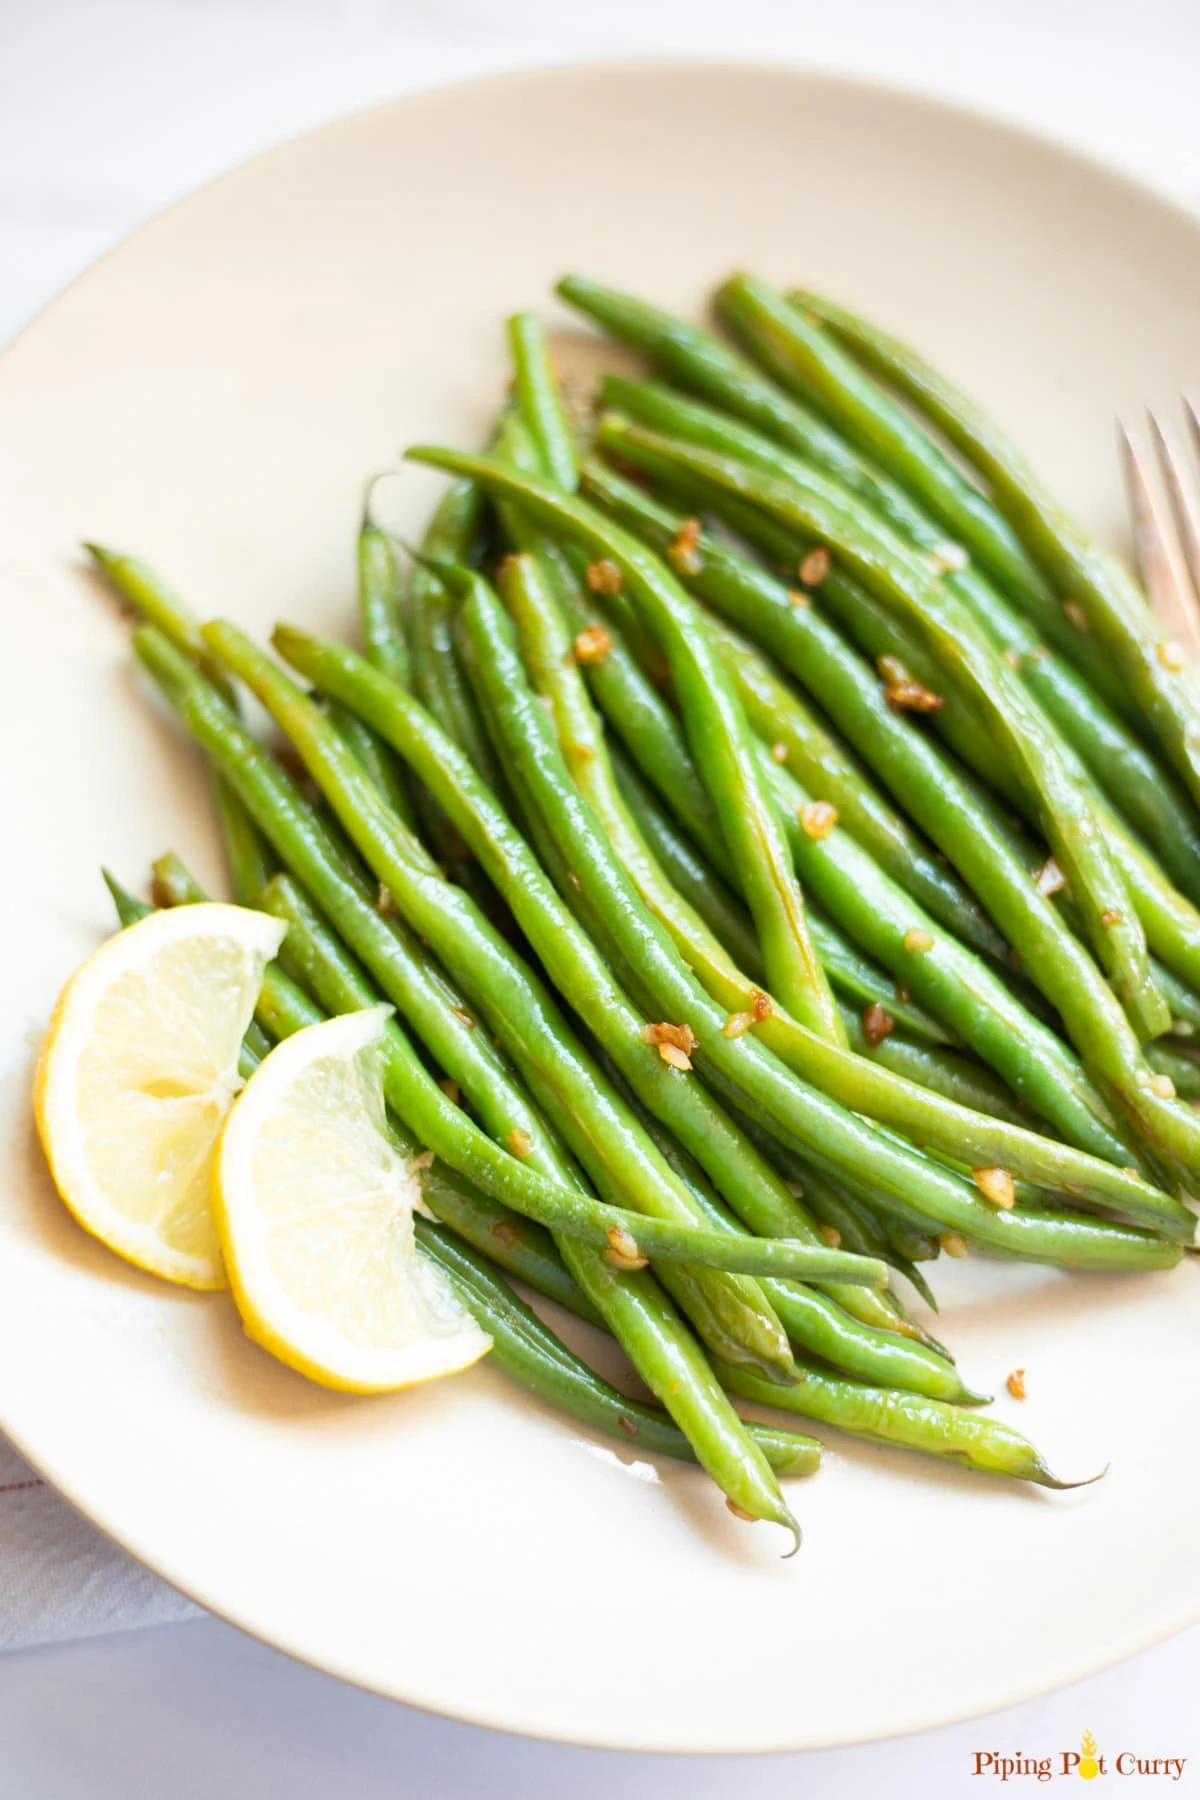 Garlic green beans with lemon on a plate